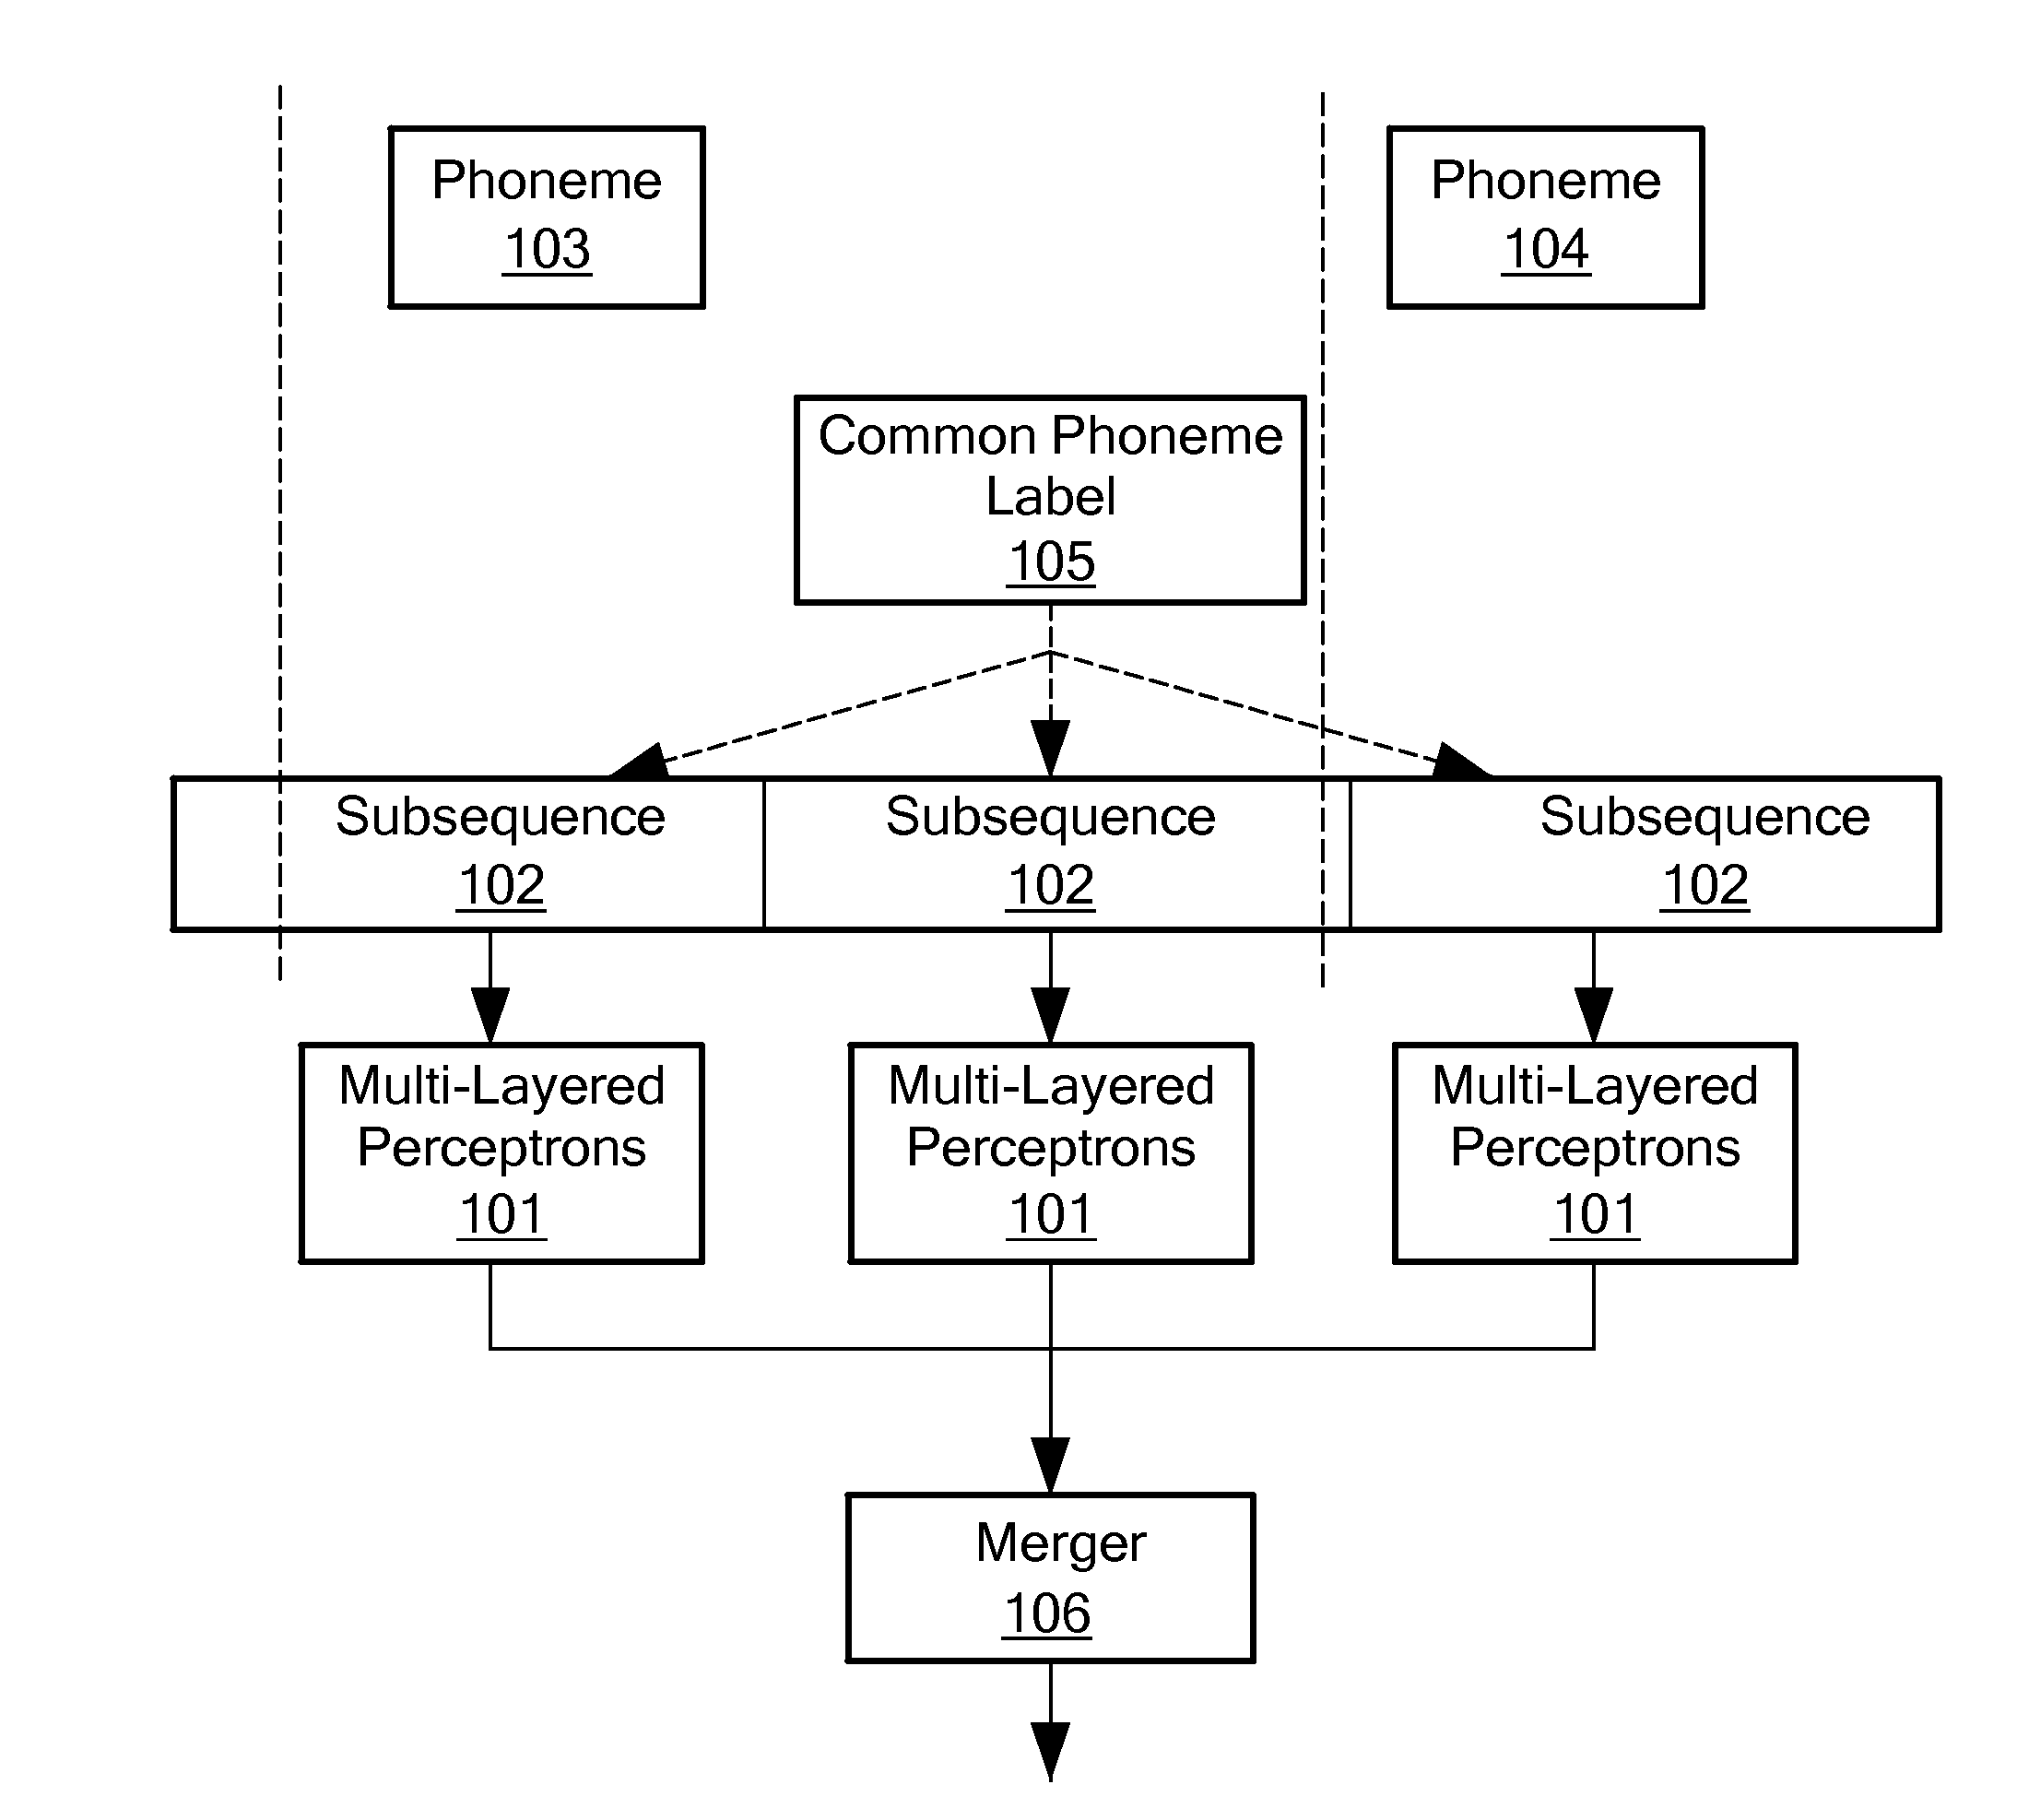 Method for Automated Training of a Plurality of Artificial Neural Networks